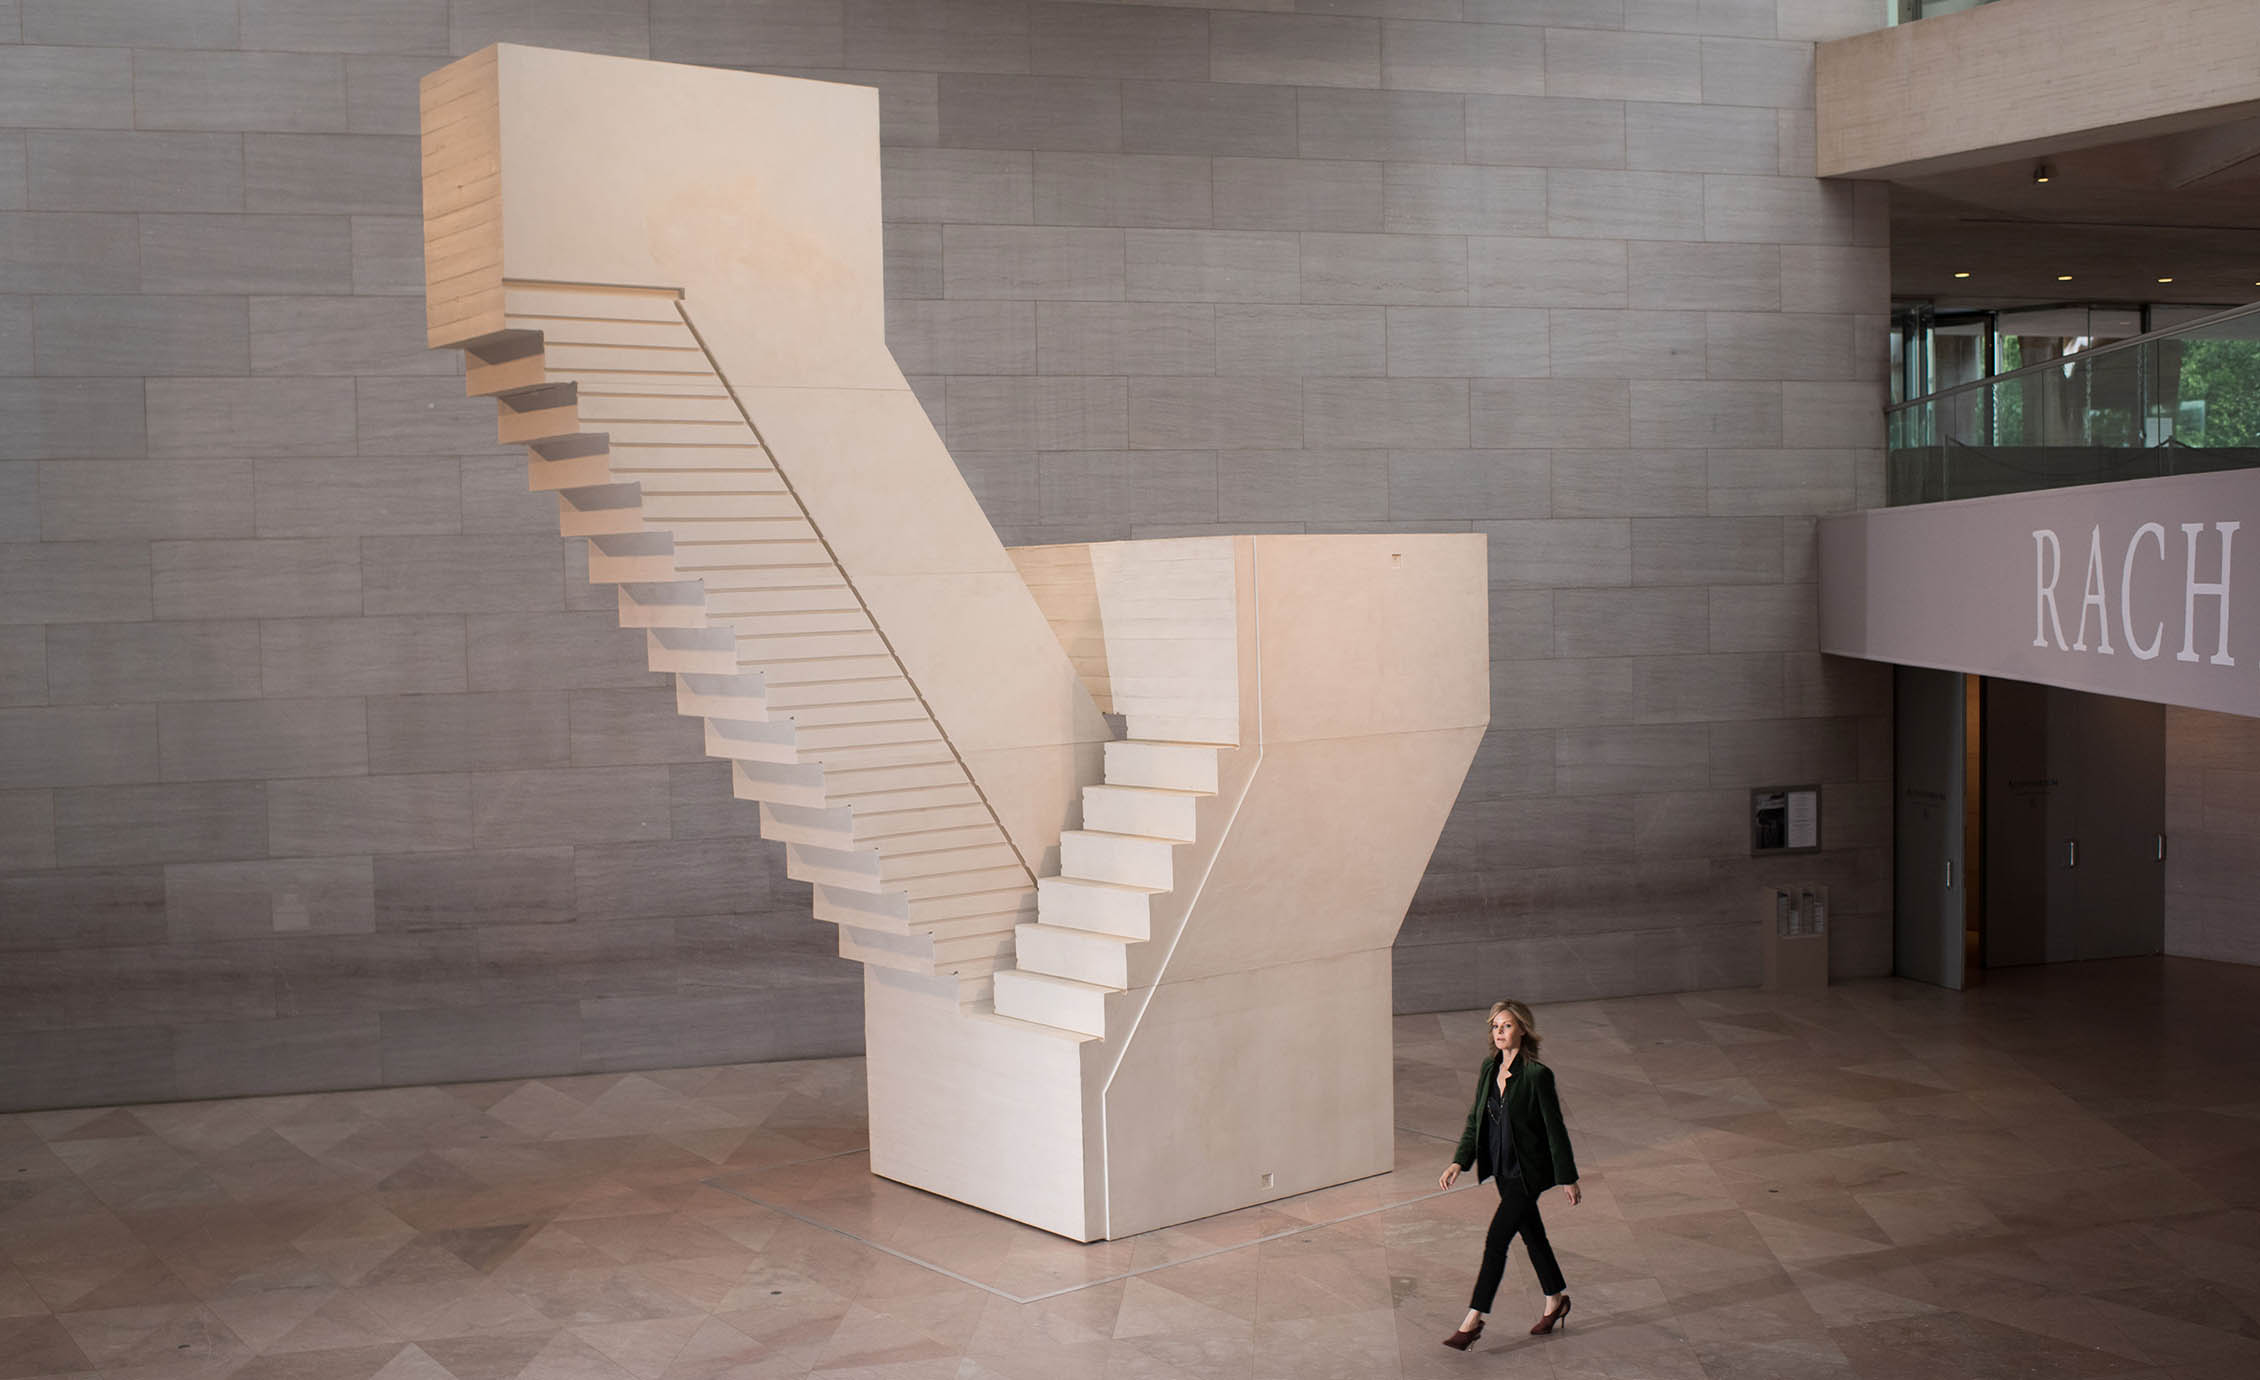 Virginia Shore was instrumental in bringing Rachel Whiteread’s work to the US Embassy in London. Untitled (Domestic), 2002, from Whiteread’s survey show at the National Gallery of Art in DC. Photo by Kate Warren.